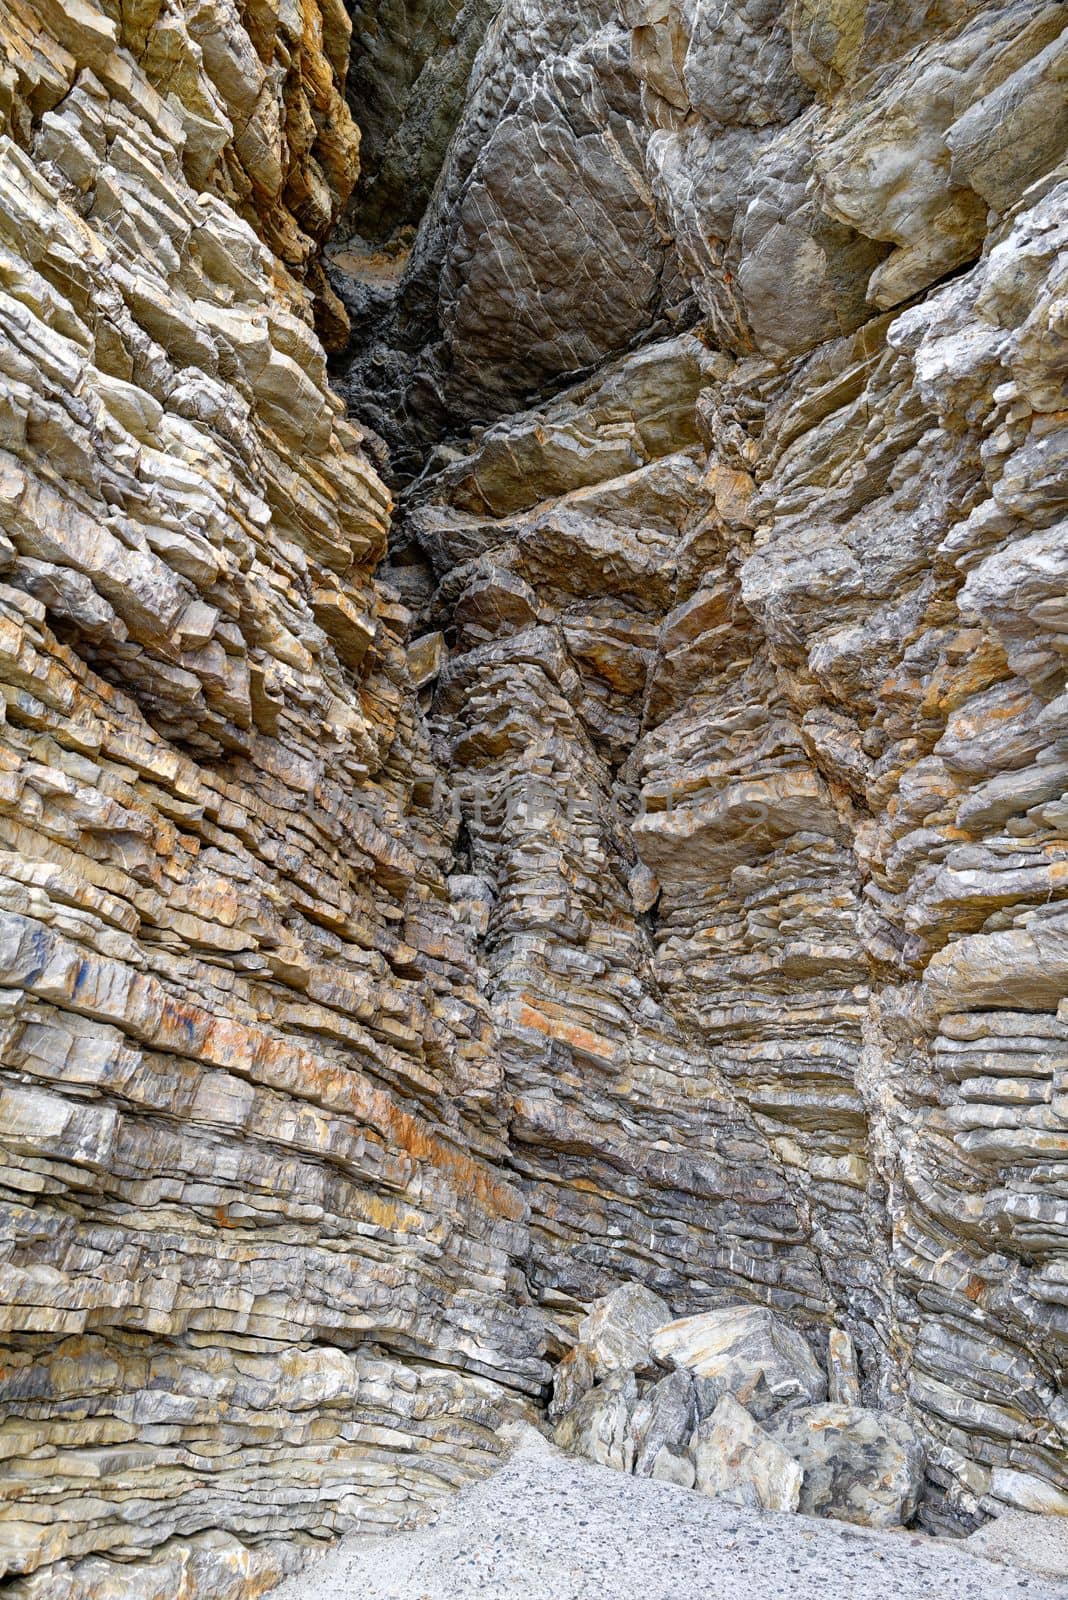 An interesting geological formation, consisting of light individual layers of limestone.